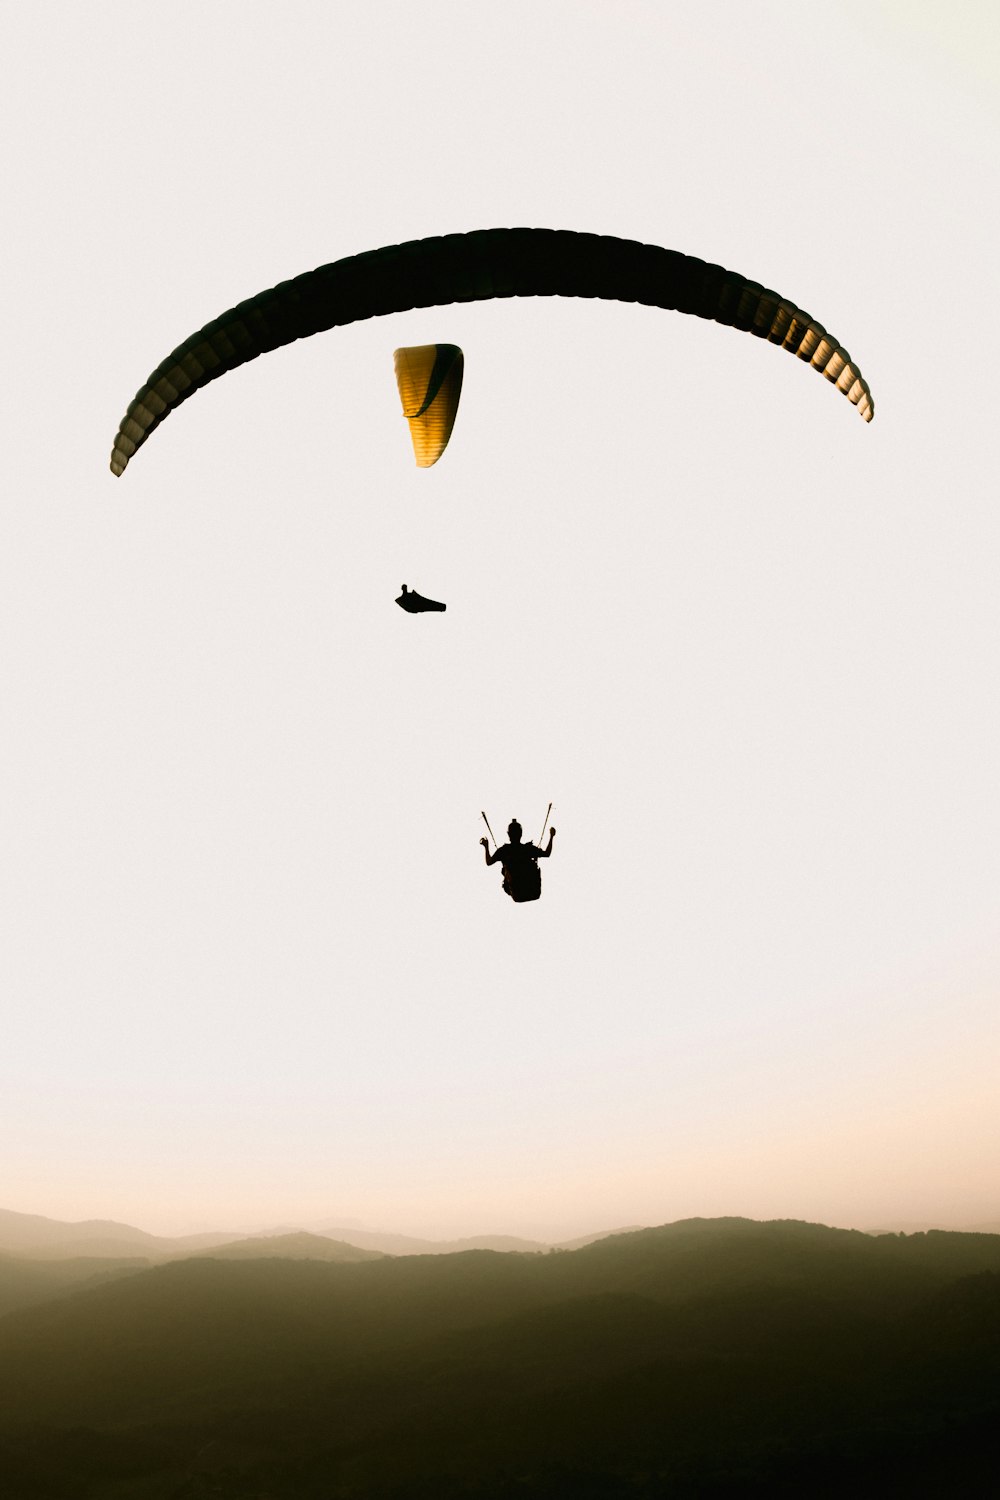 silhouette of 2 person riding parachute